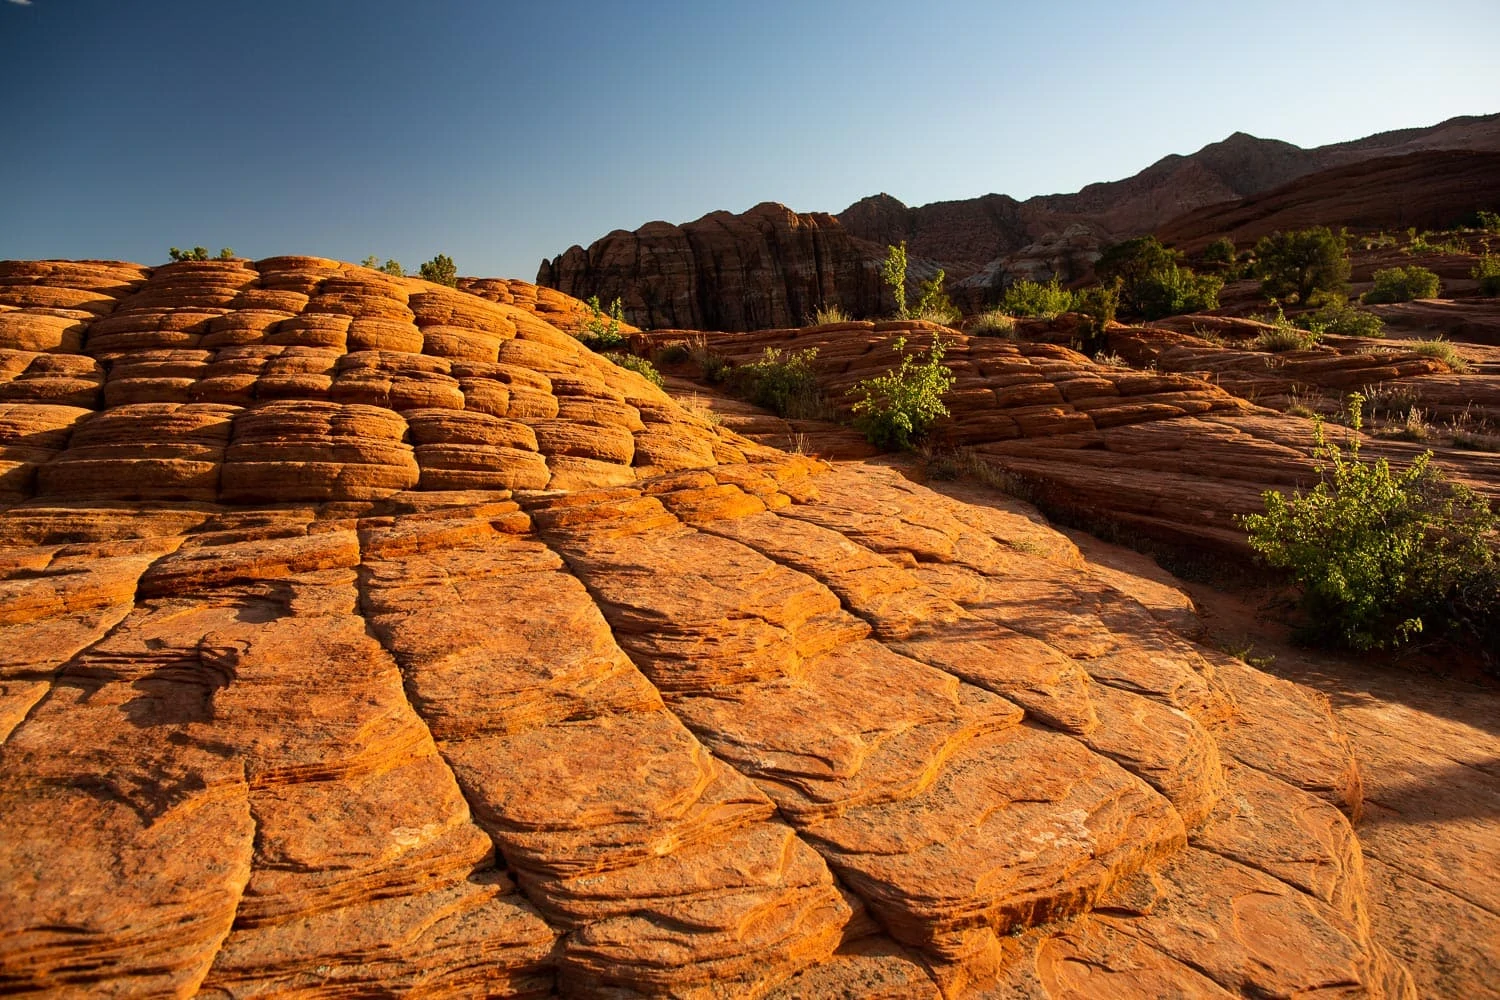 The orange petrified dunes are one of 4 elopement locations in Snow Canyon State Park, Utah.